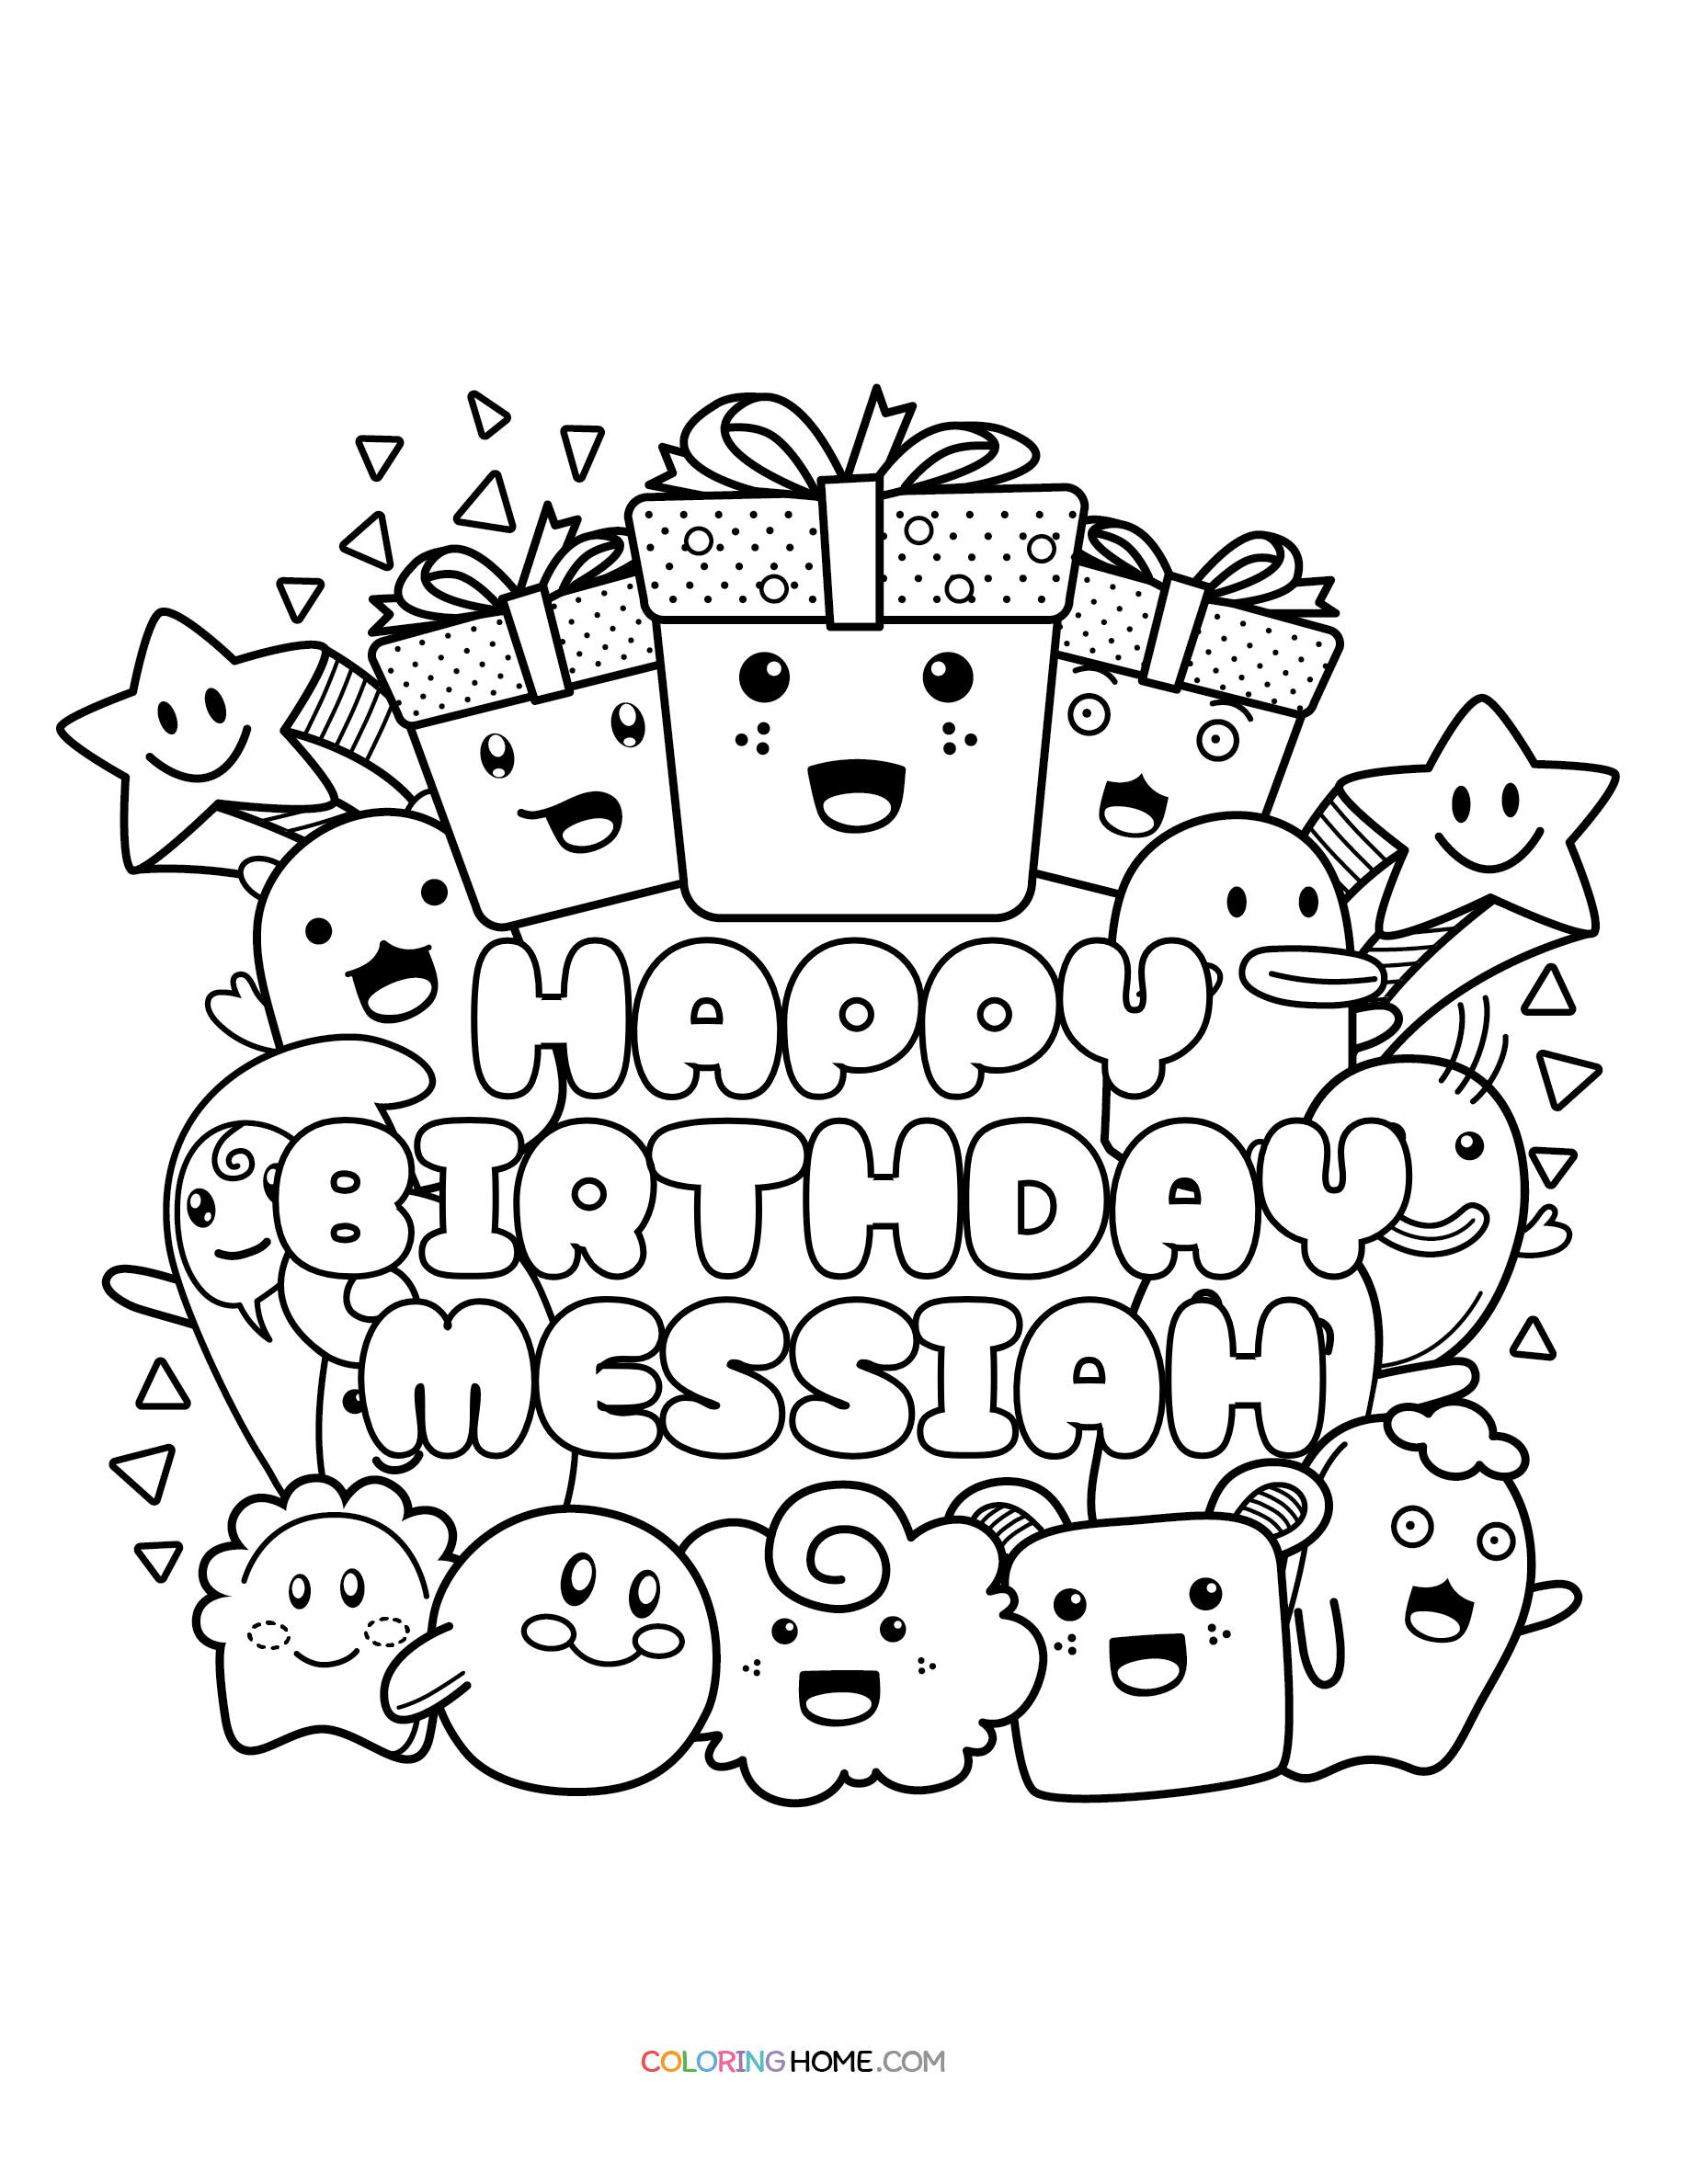 Happy Birthday Messiah coloring page